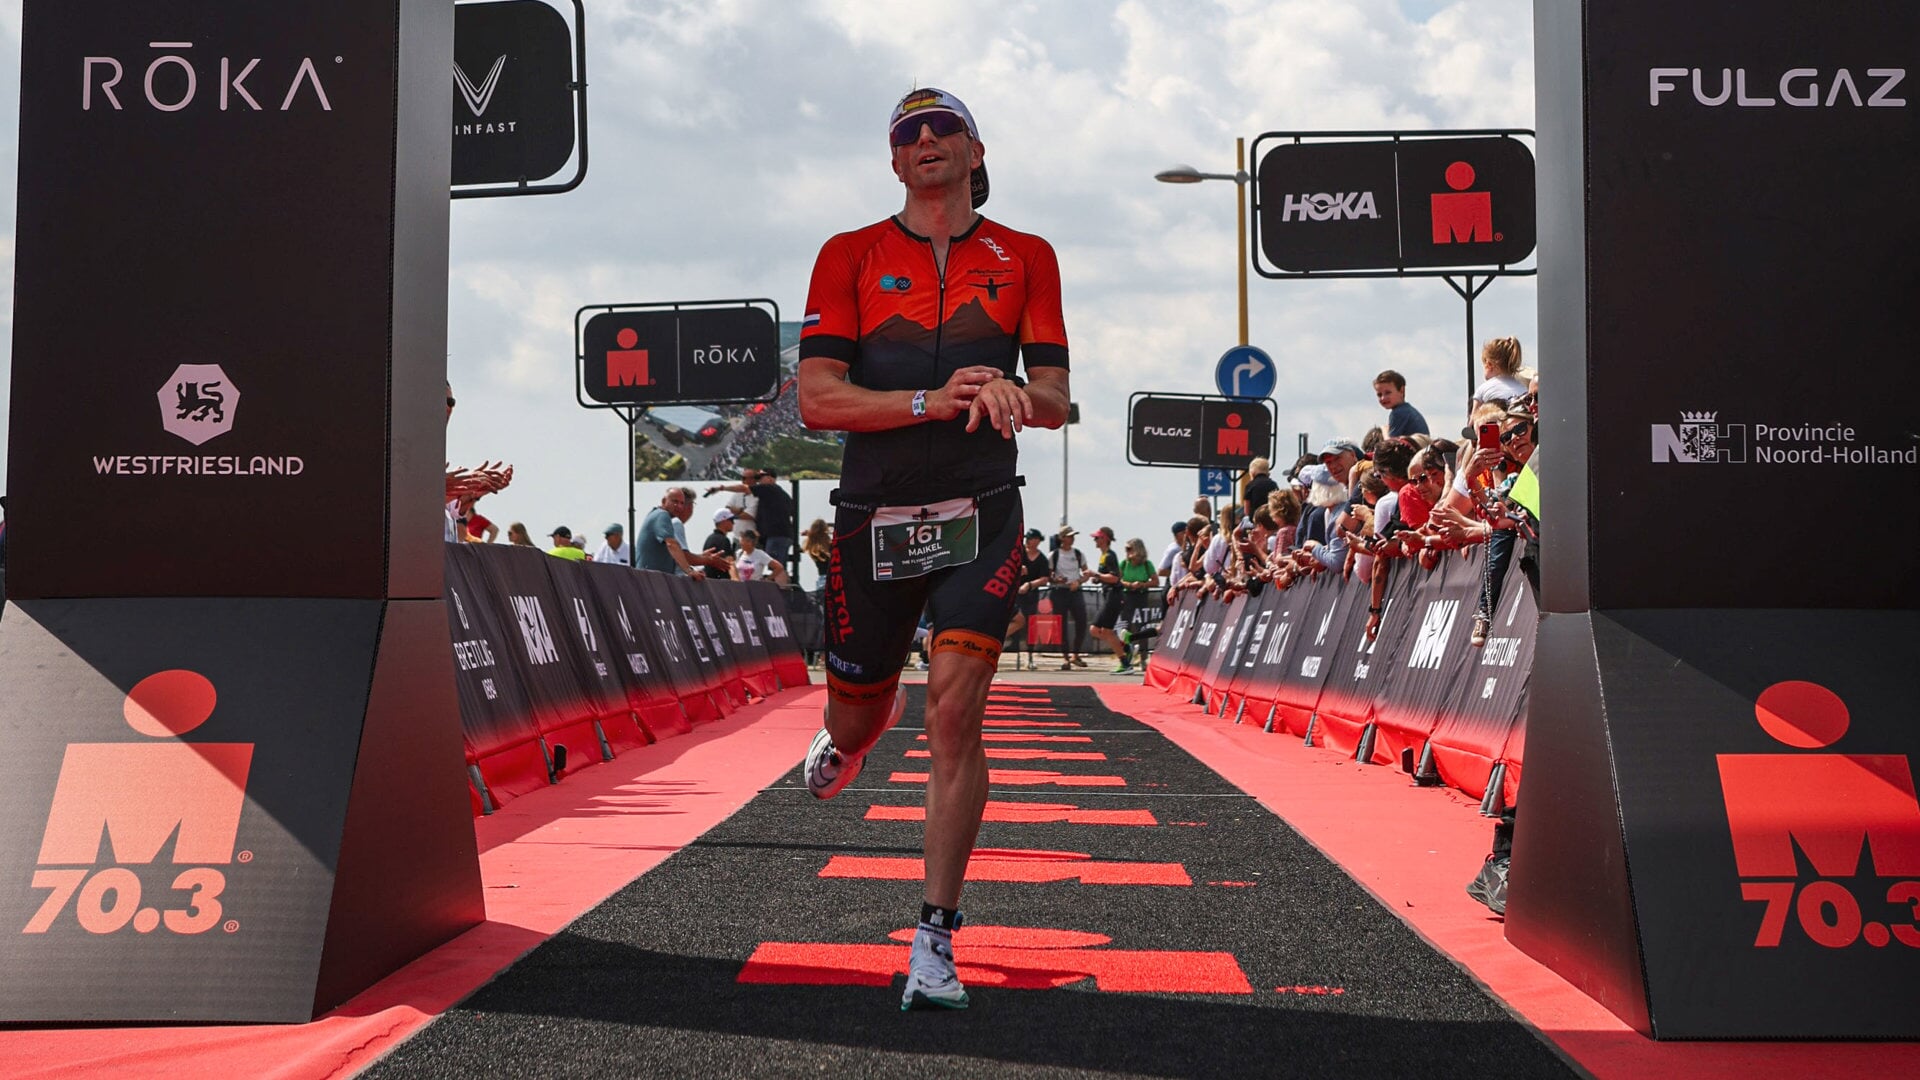 Albenar qualified for the Ironman 70.3 World Championships in New Zealand.